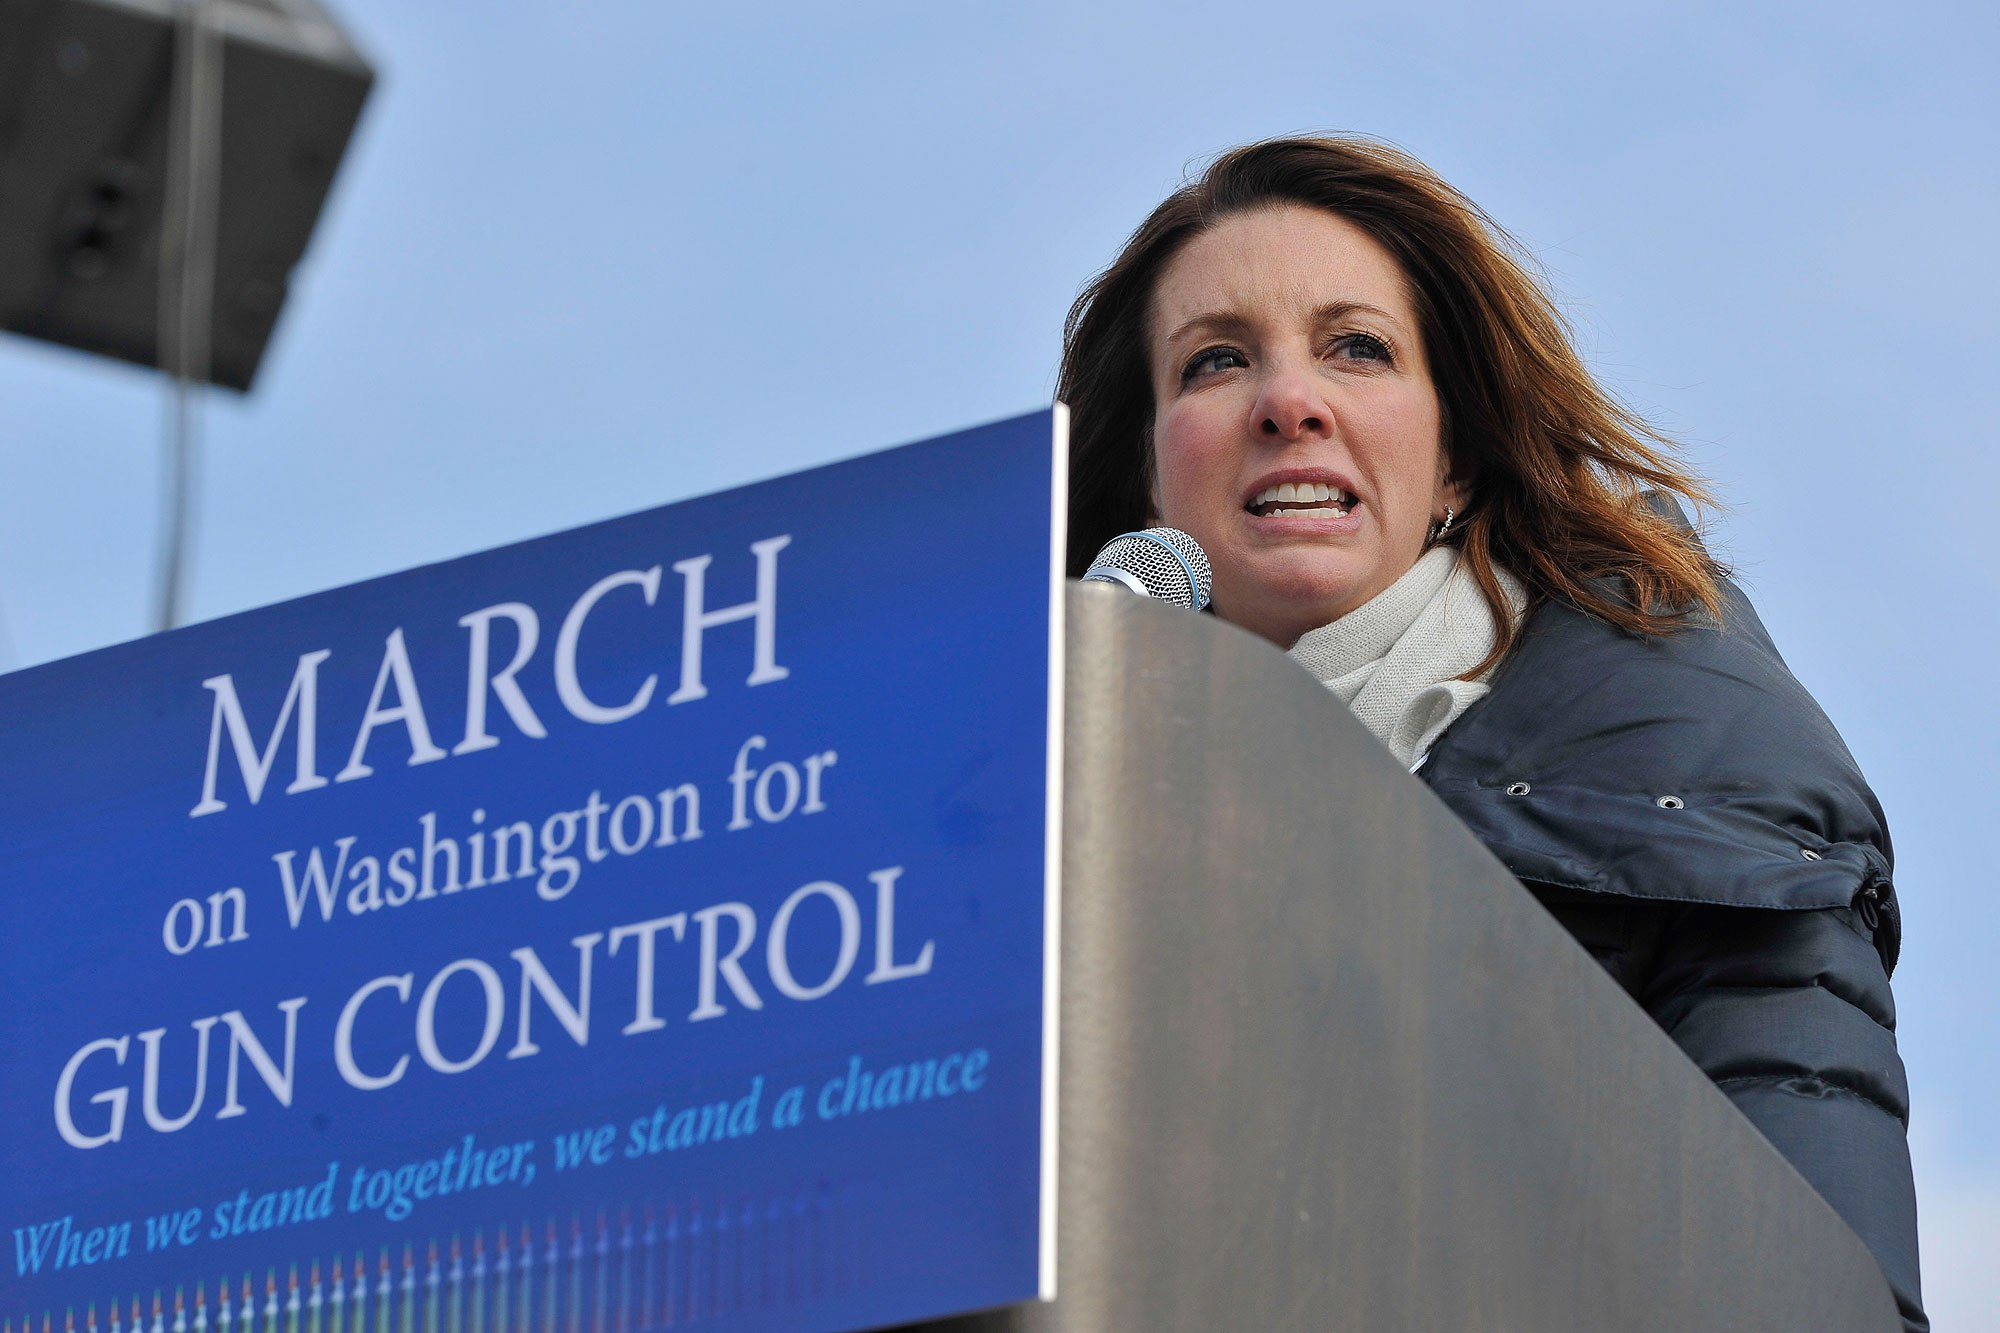 Moms Demand Founder Shannon Watts Isn’t Afraid of the Gun Lobby: “We’re Gonna Win This Issue”